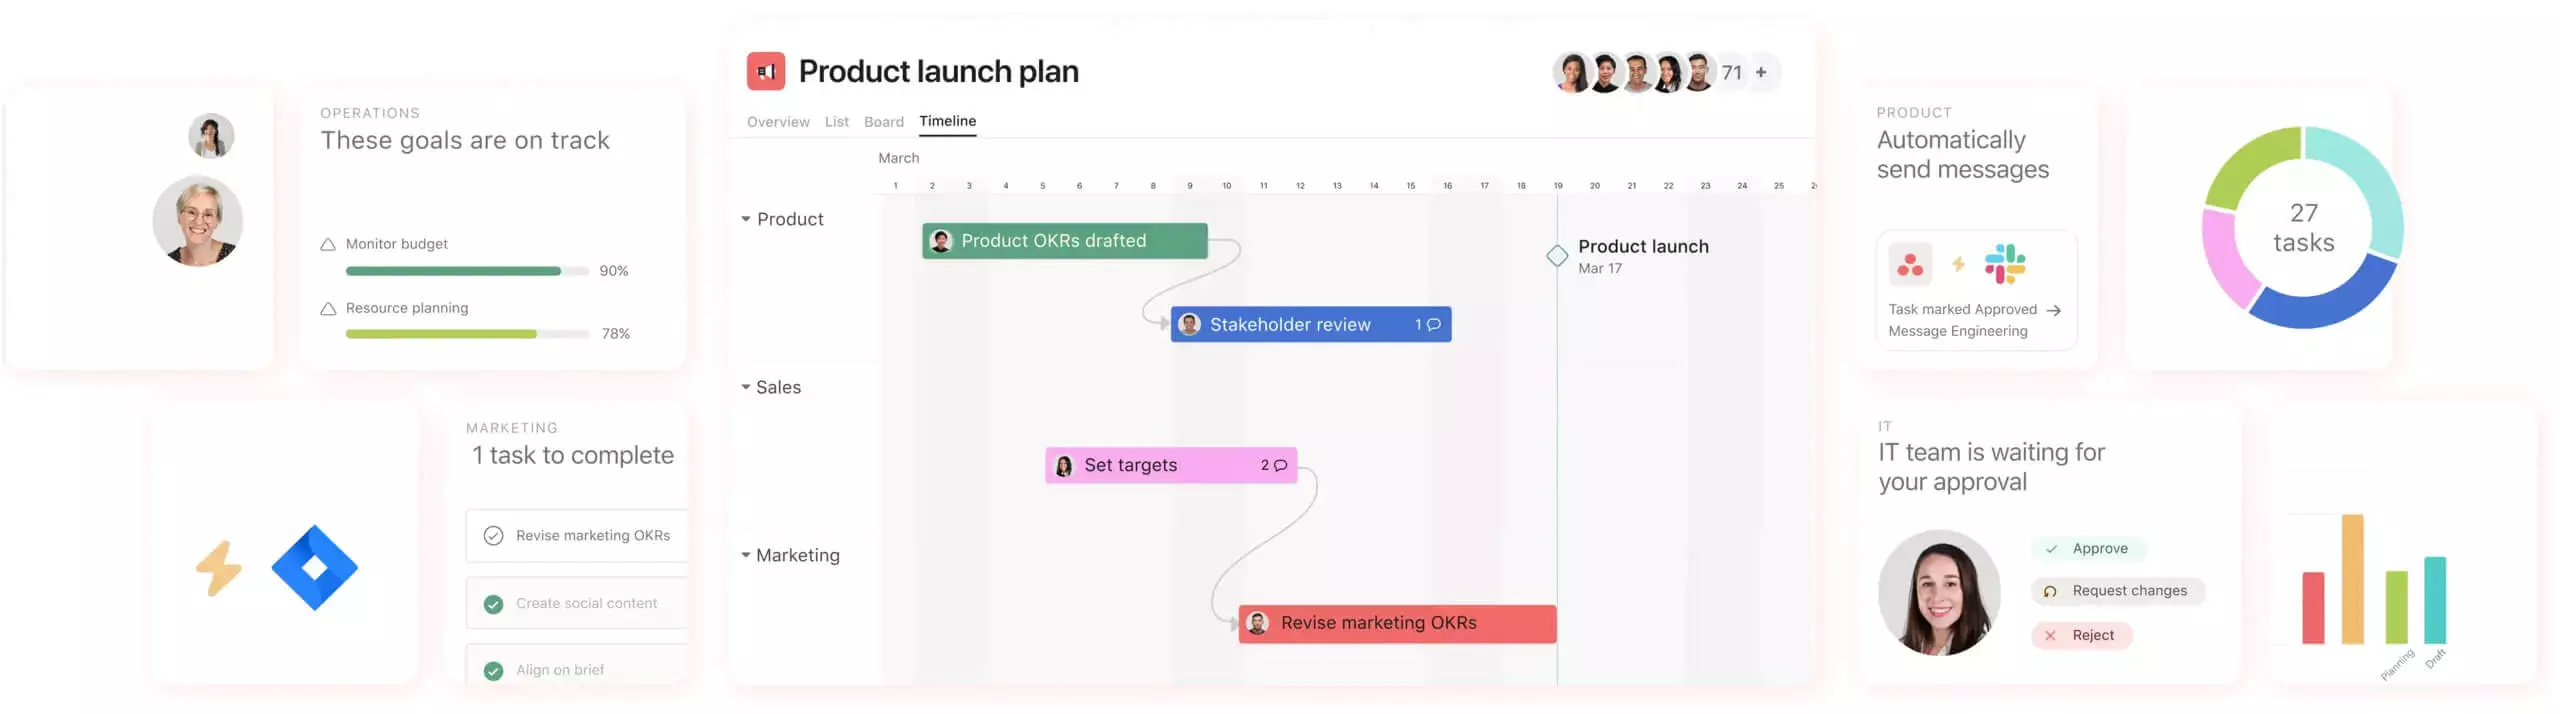 Dashboard in Asana showing a product launch plan timeline with tasks for product, sales, and marketing. 